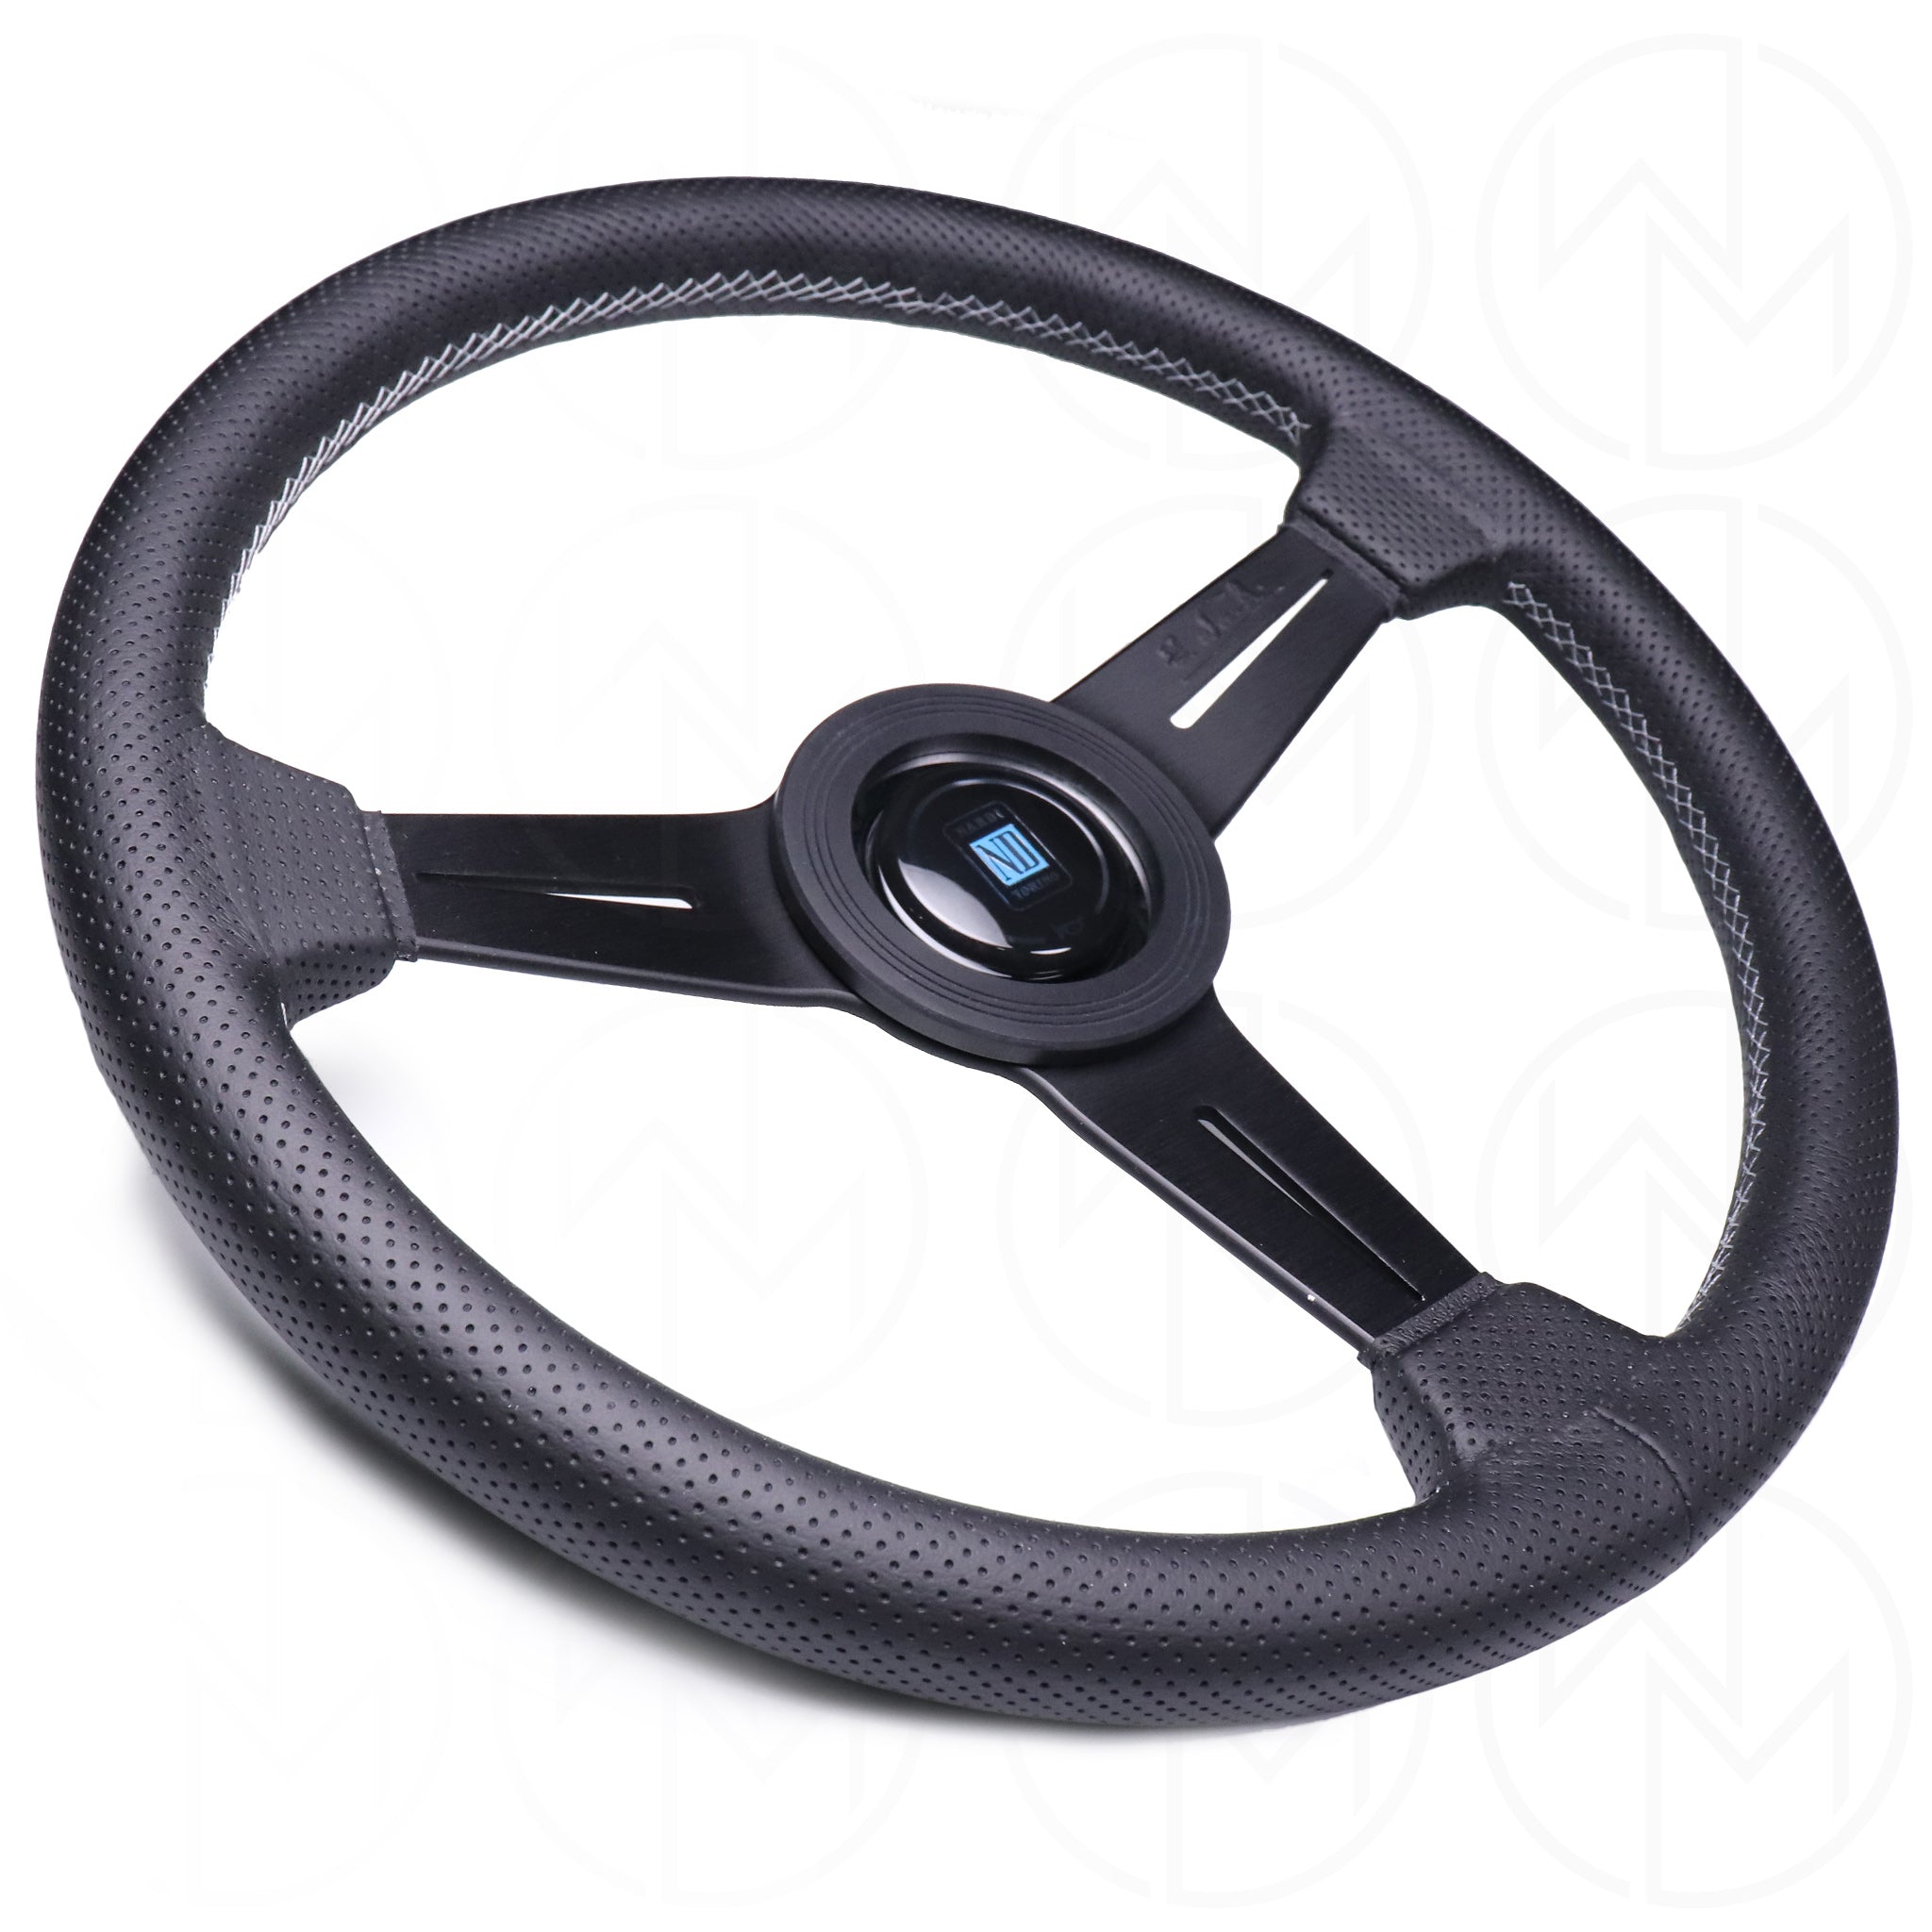 Nardi Classic Steering Wheel - 340mm Perforated Leather w/Black Spoke & Ring and Grey Stitch